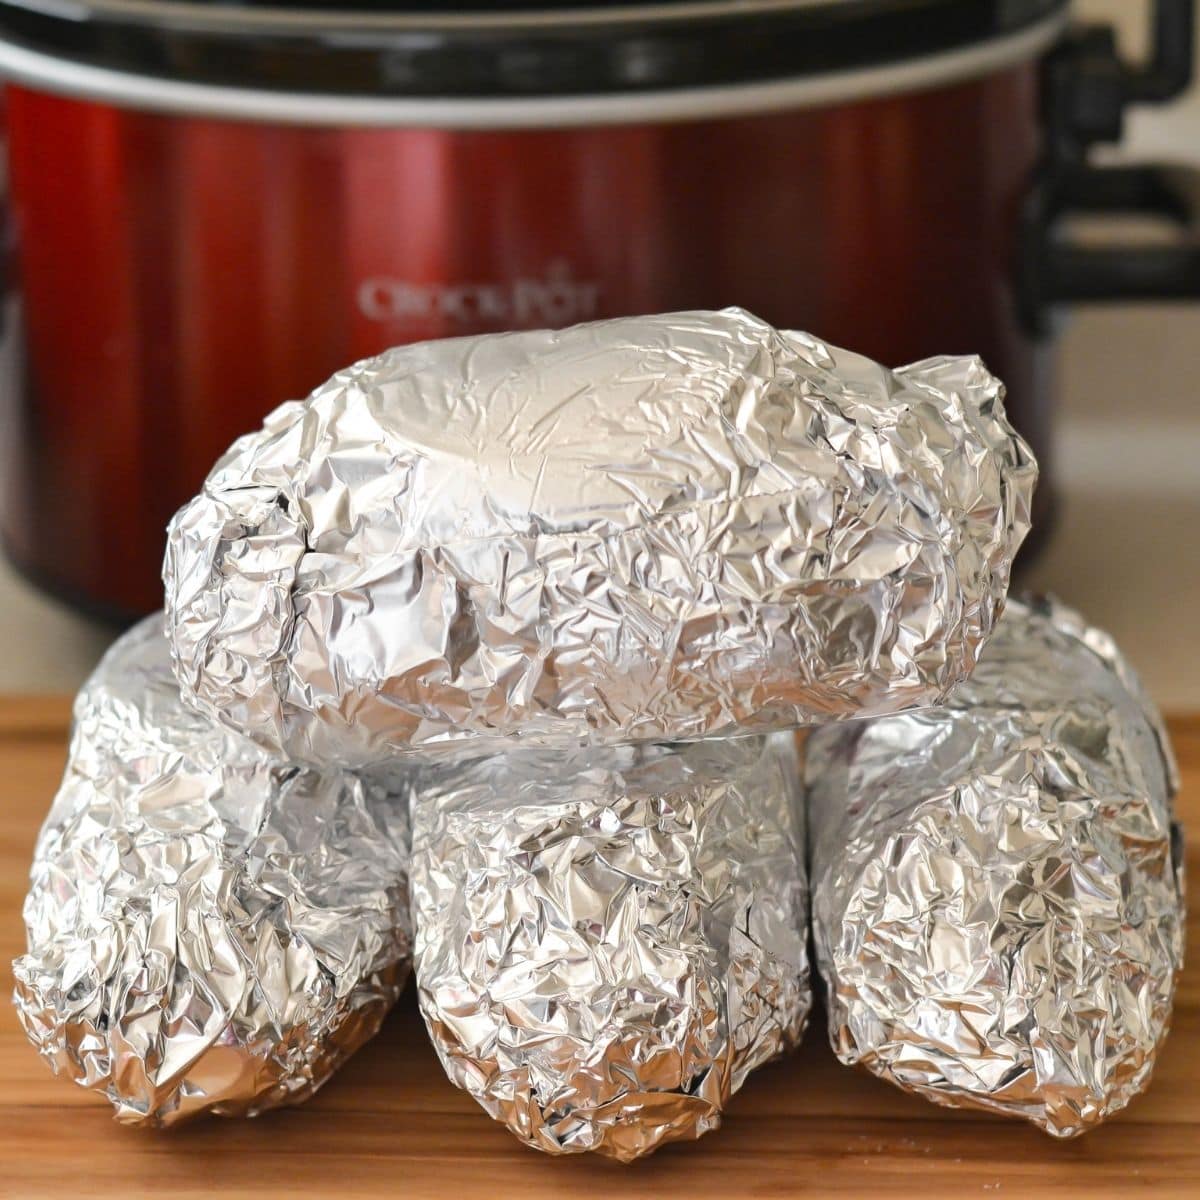 Four baking potatoes wrapped in aluminum on a cutting board in front of a crock pot.